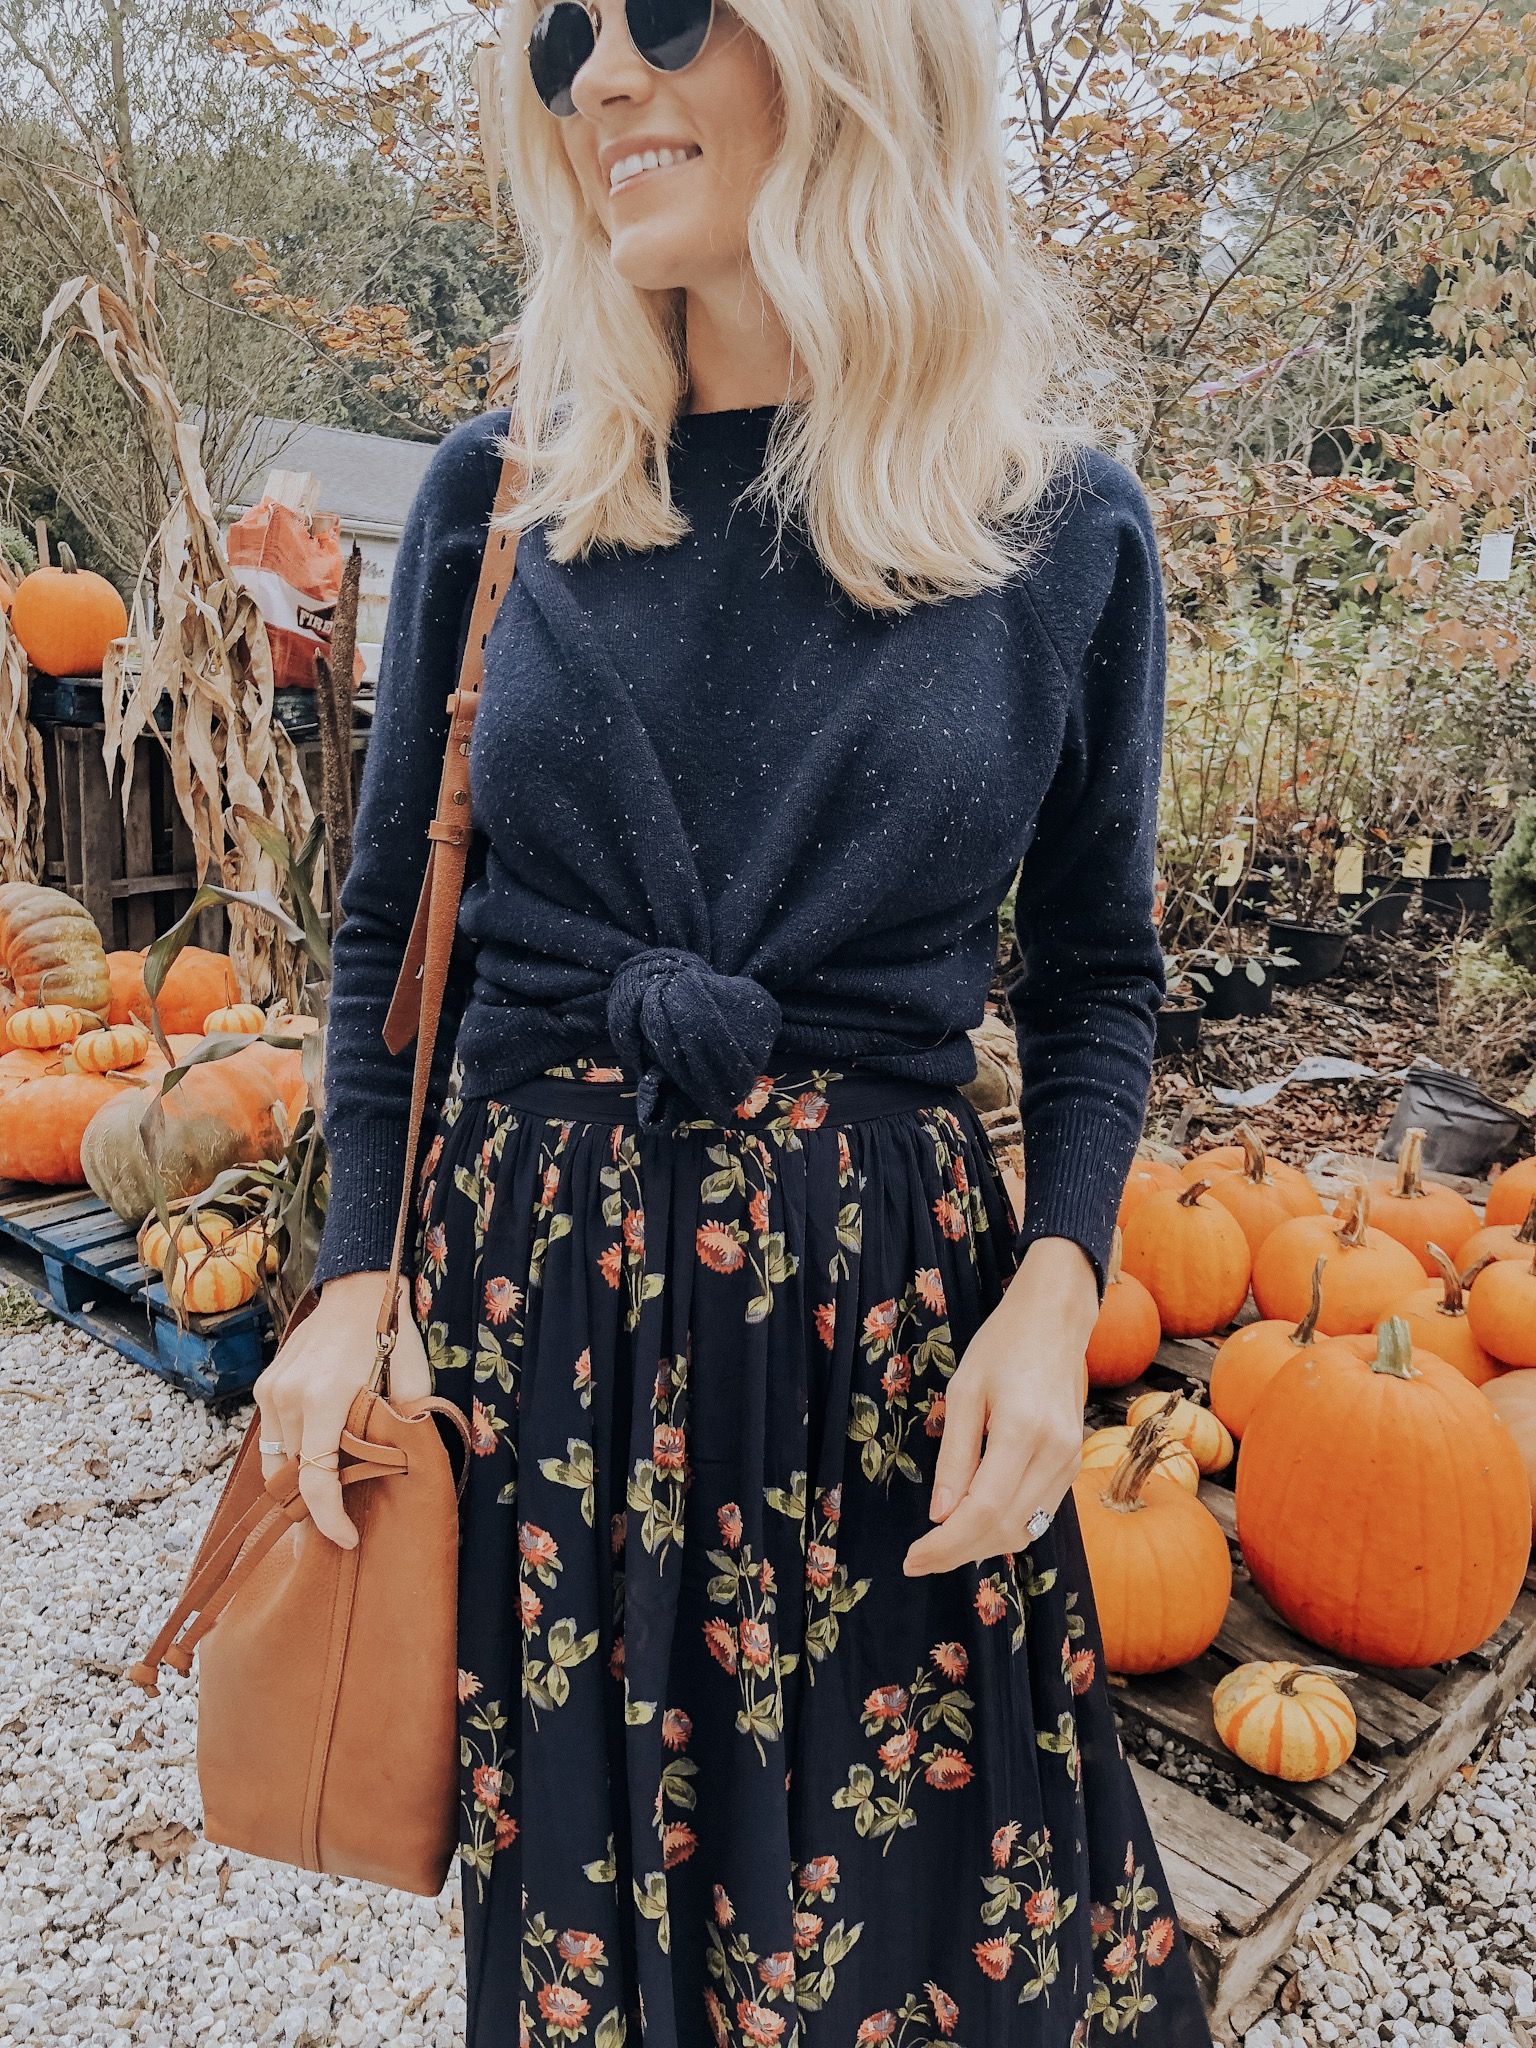 FALL CAPSULE WARDROBE | GUIDE TO YOUR MOST STYLISH FALL - Pure Joy Home - FALL CAPSULE WARDROBE | GUIDE TO YOUR MOST STYLISH FALL - Pure Joy Home -   19 boho style Fall ideas